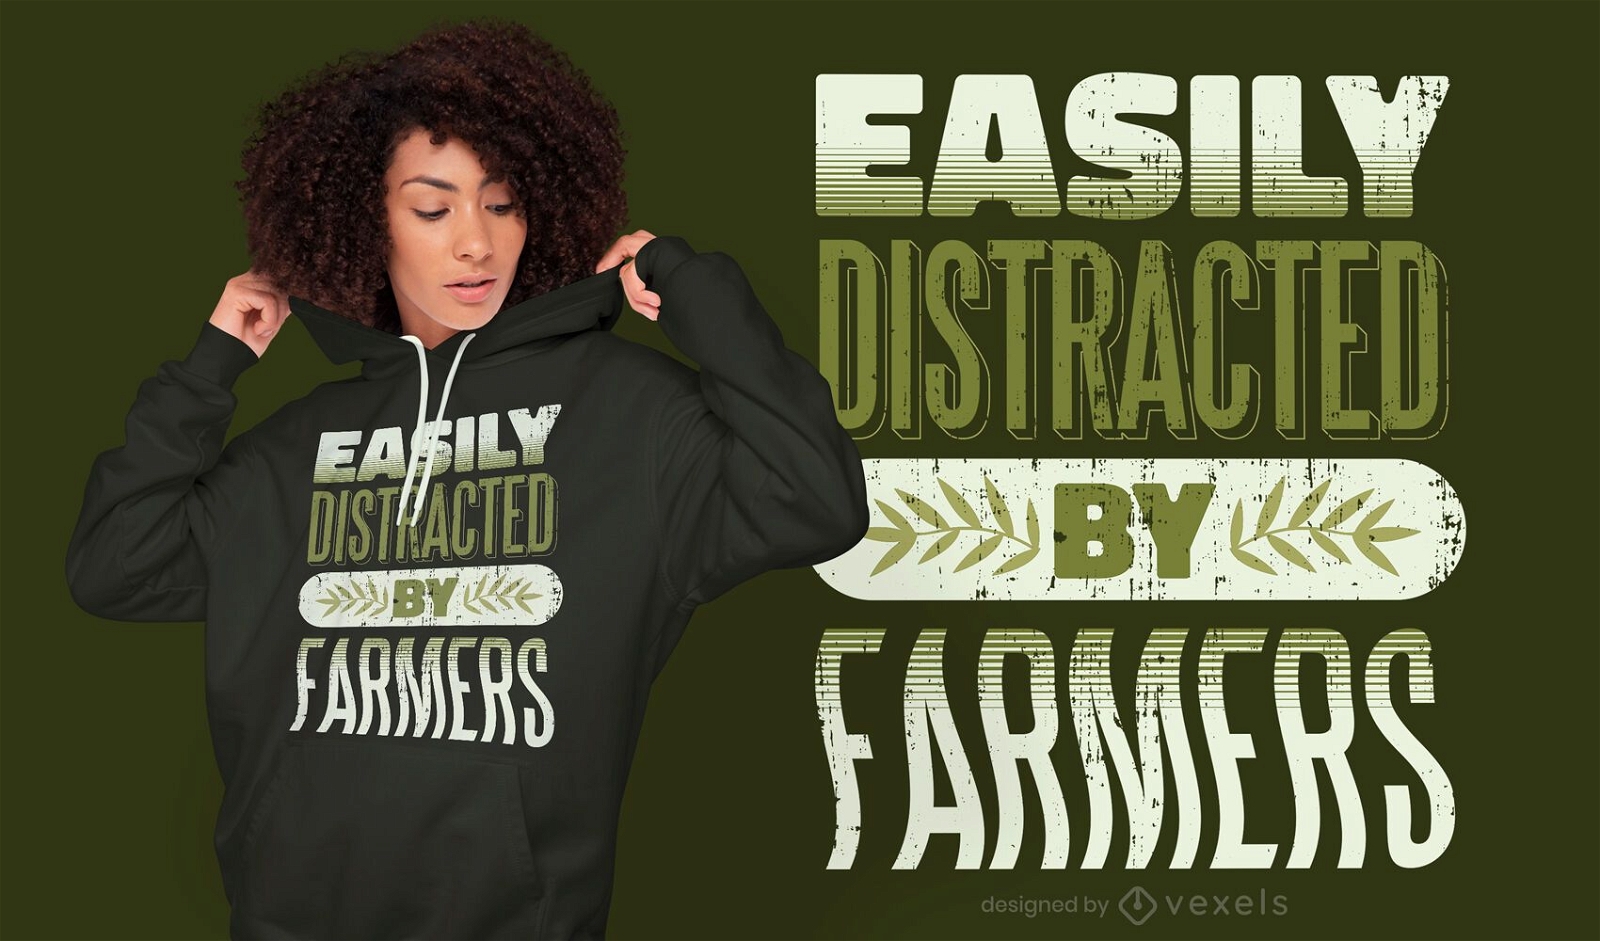 Distracted by farmers quote t-shirt design